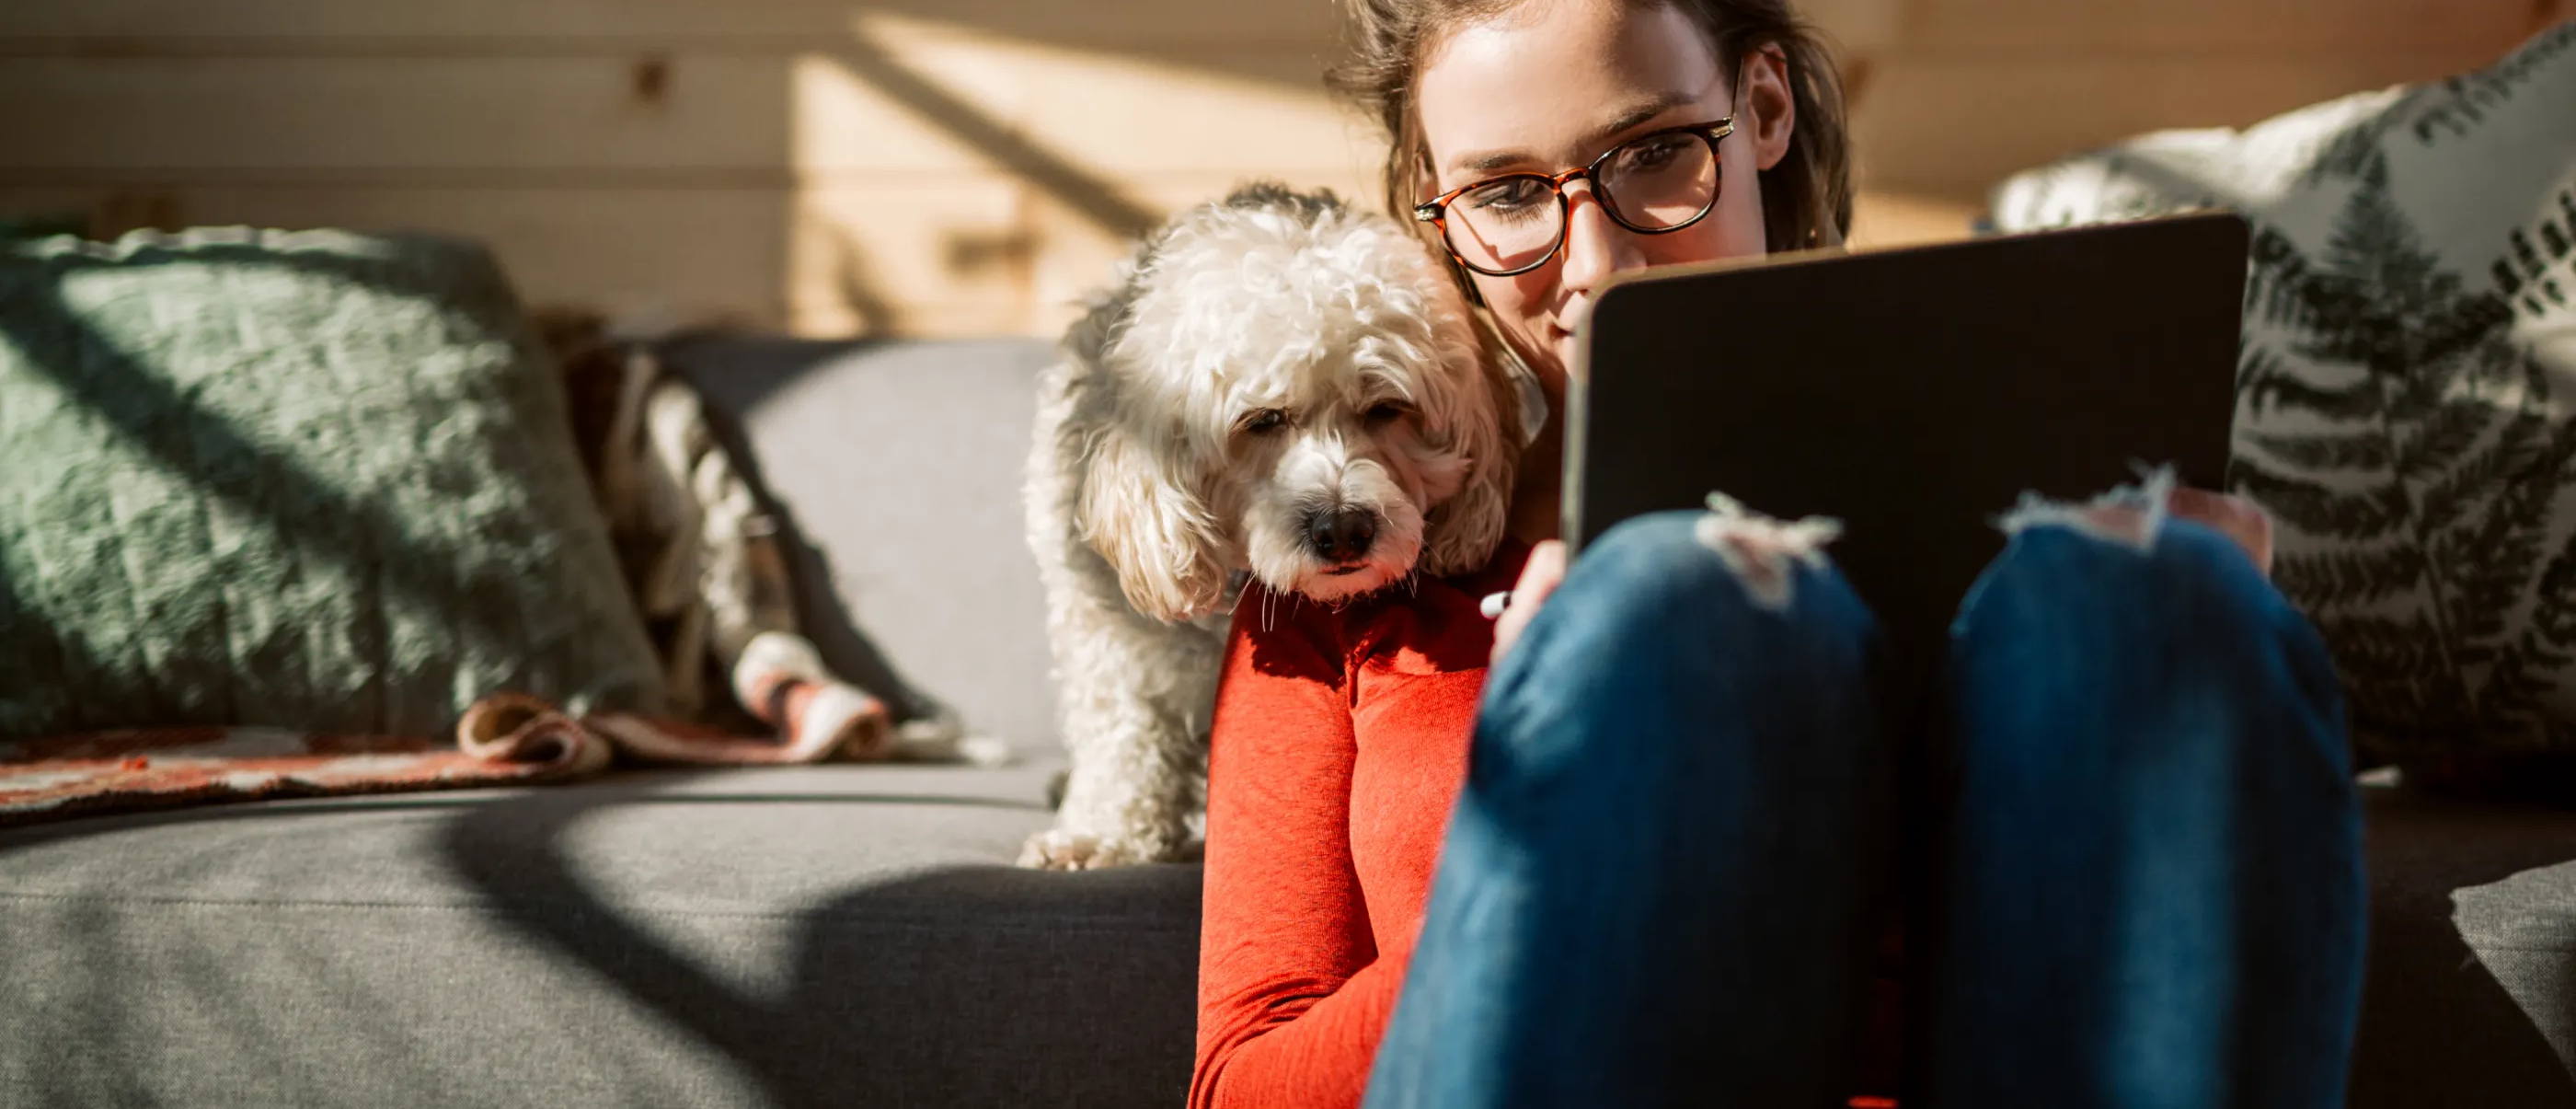 Woman using her tablet while sitting on the floor with her dog.